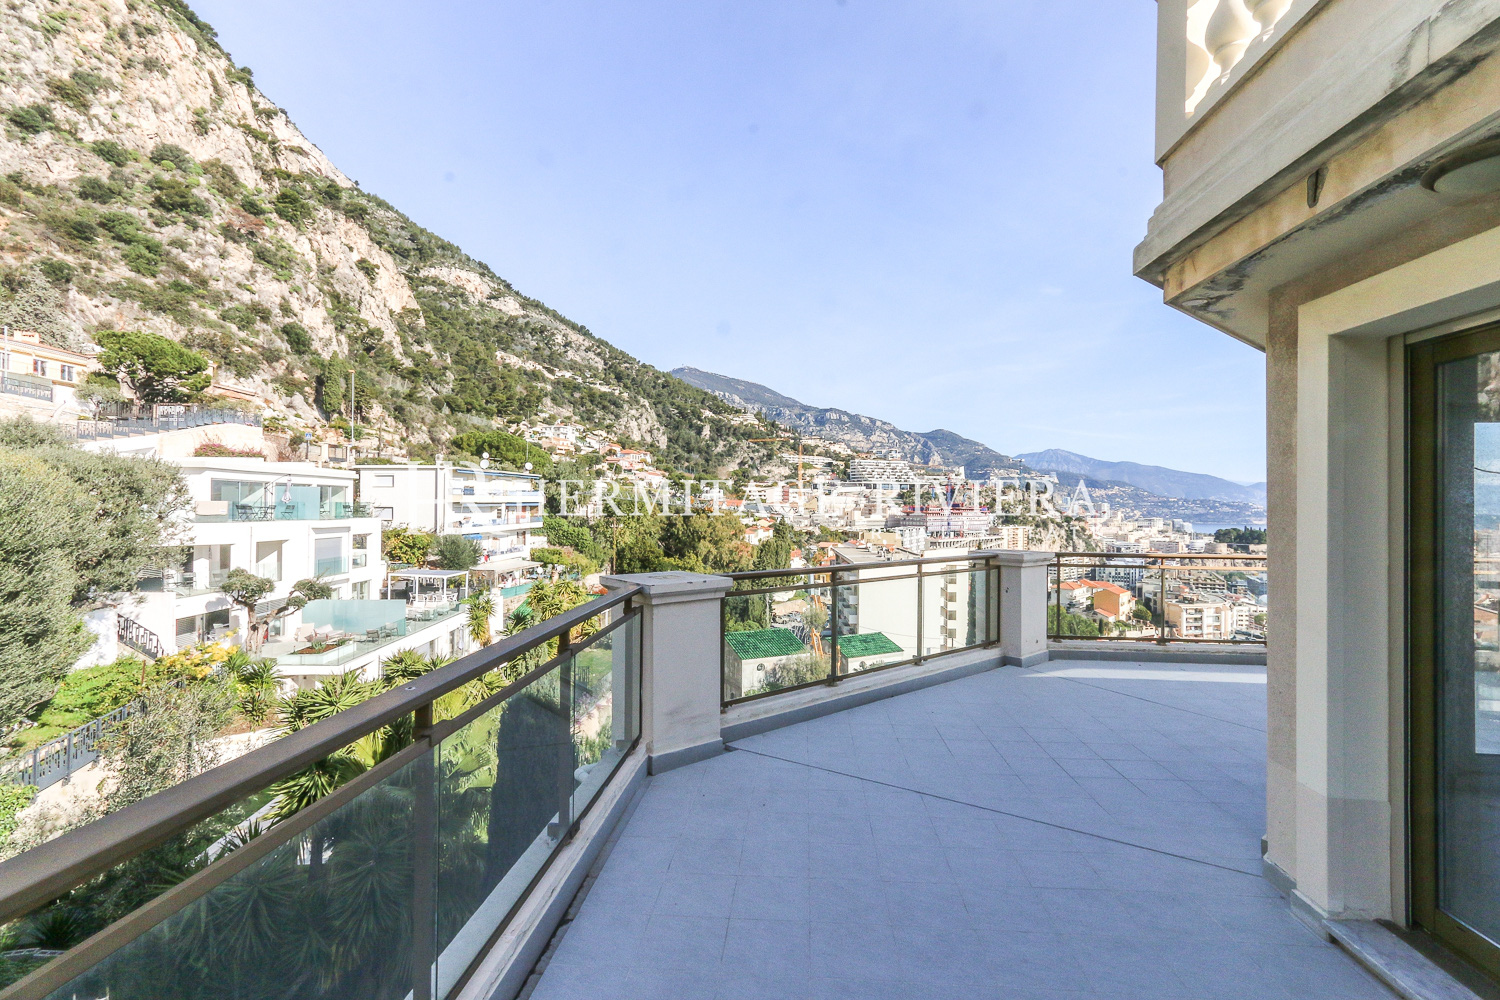 Apartment to renovate with views over Monaco (image 3)